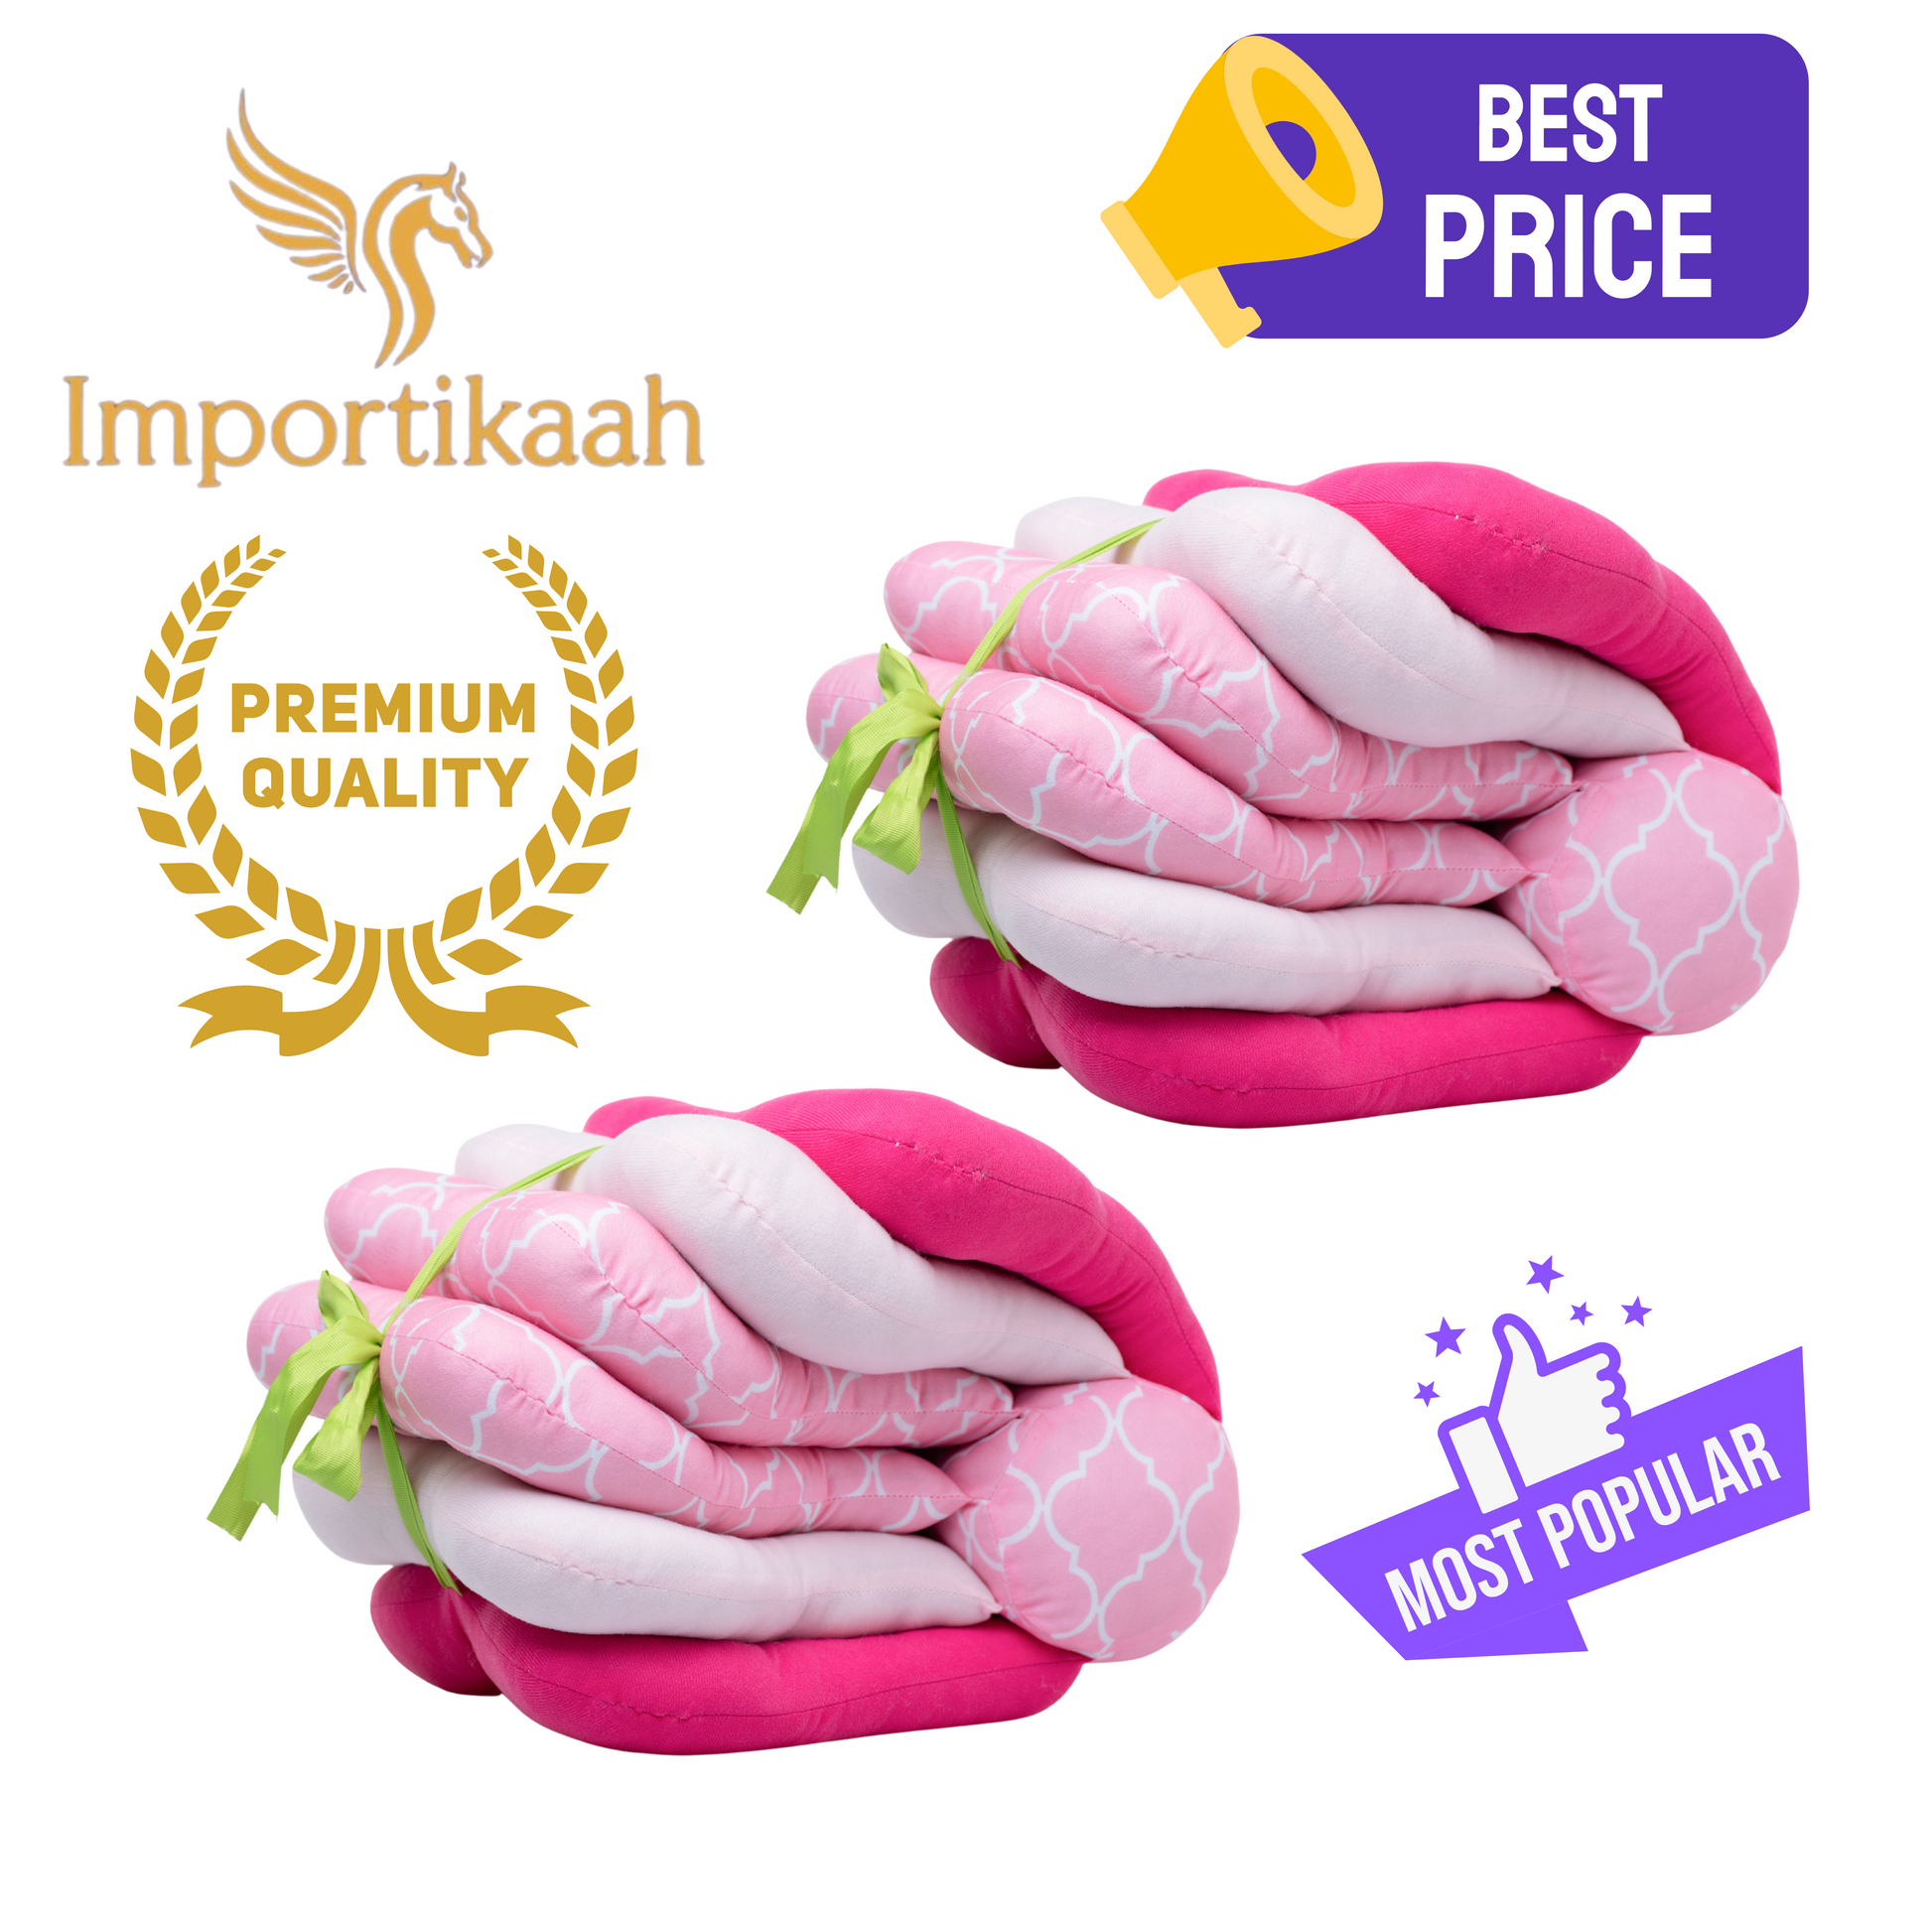 Two-pack-of-Importikaah-Baby-Breastfeeding-Adjustable-Pillows